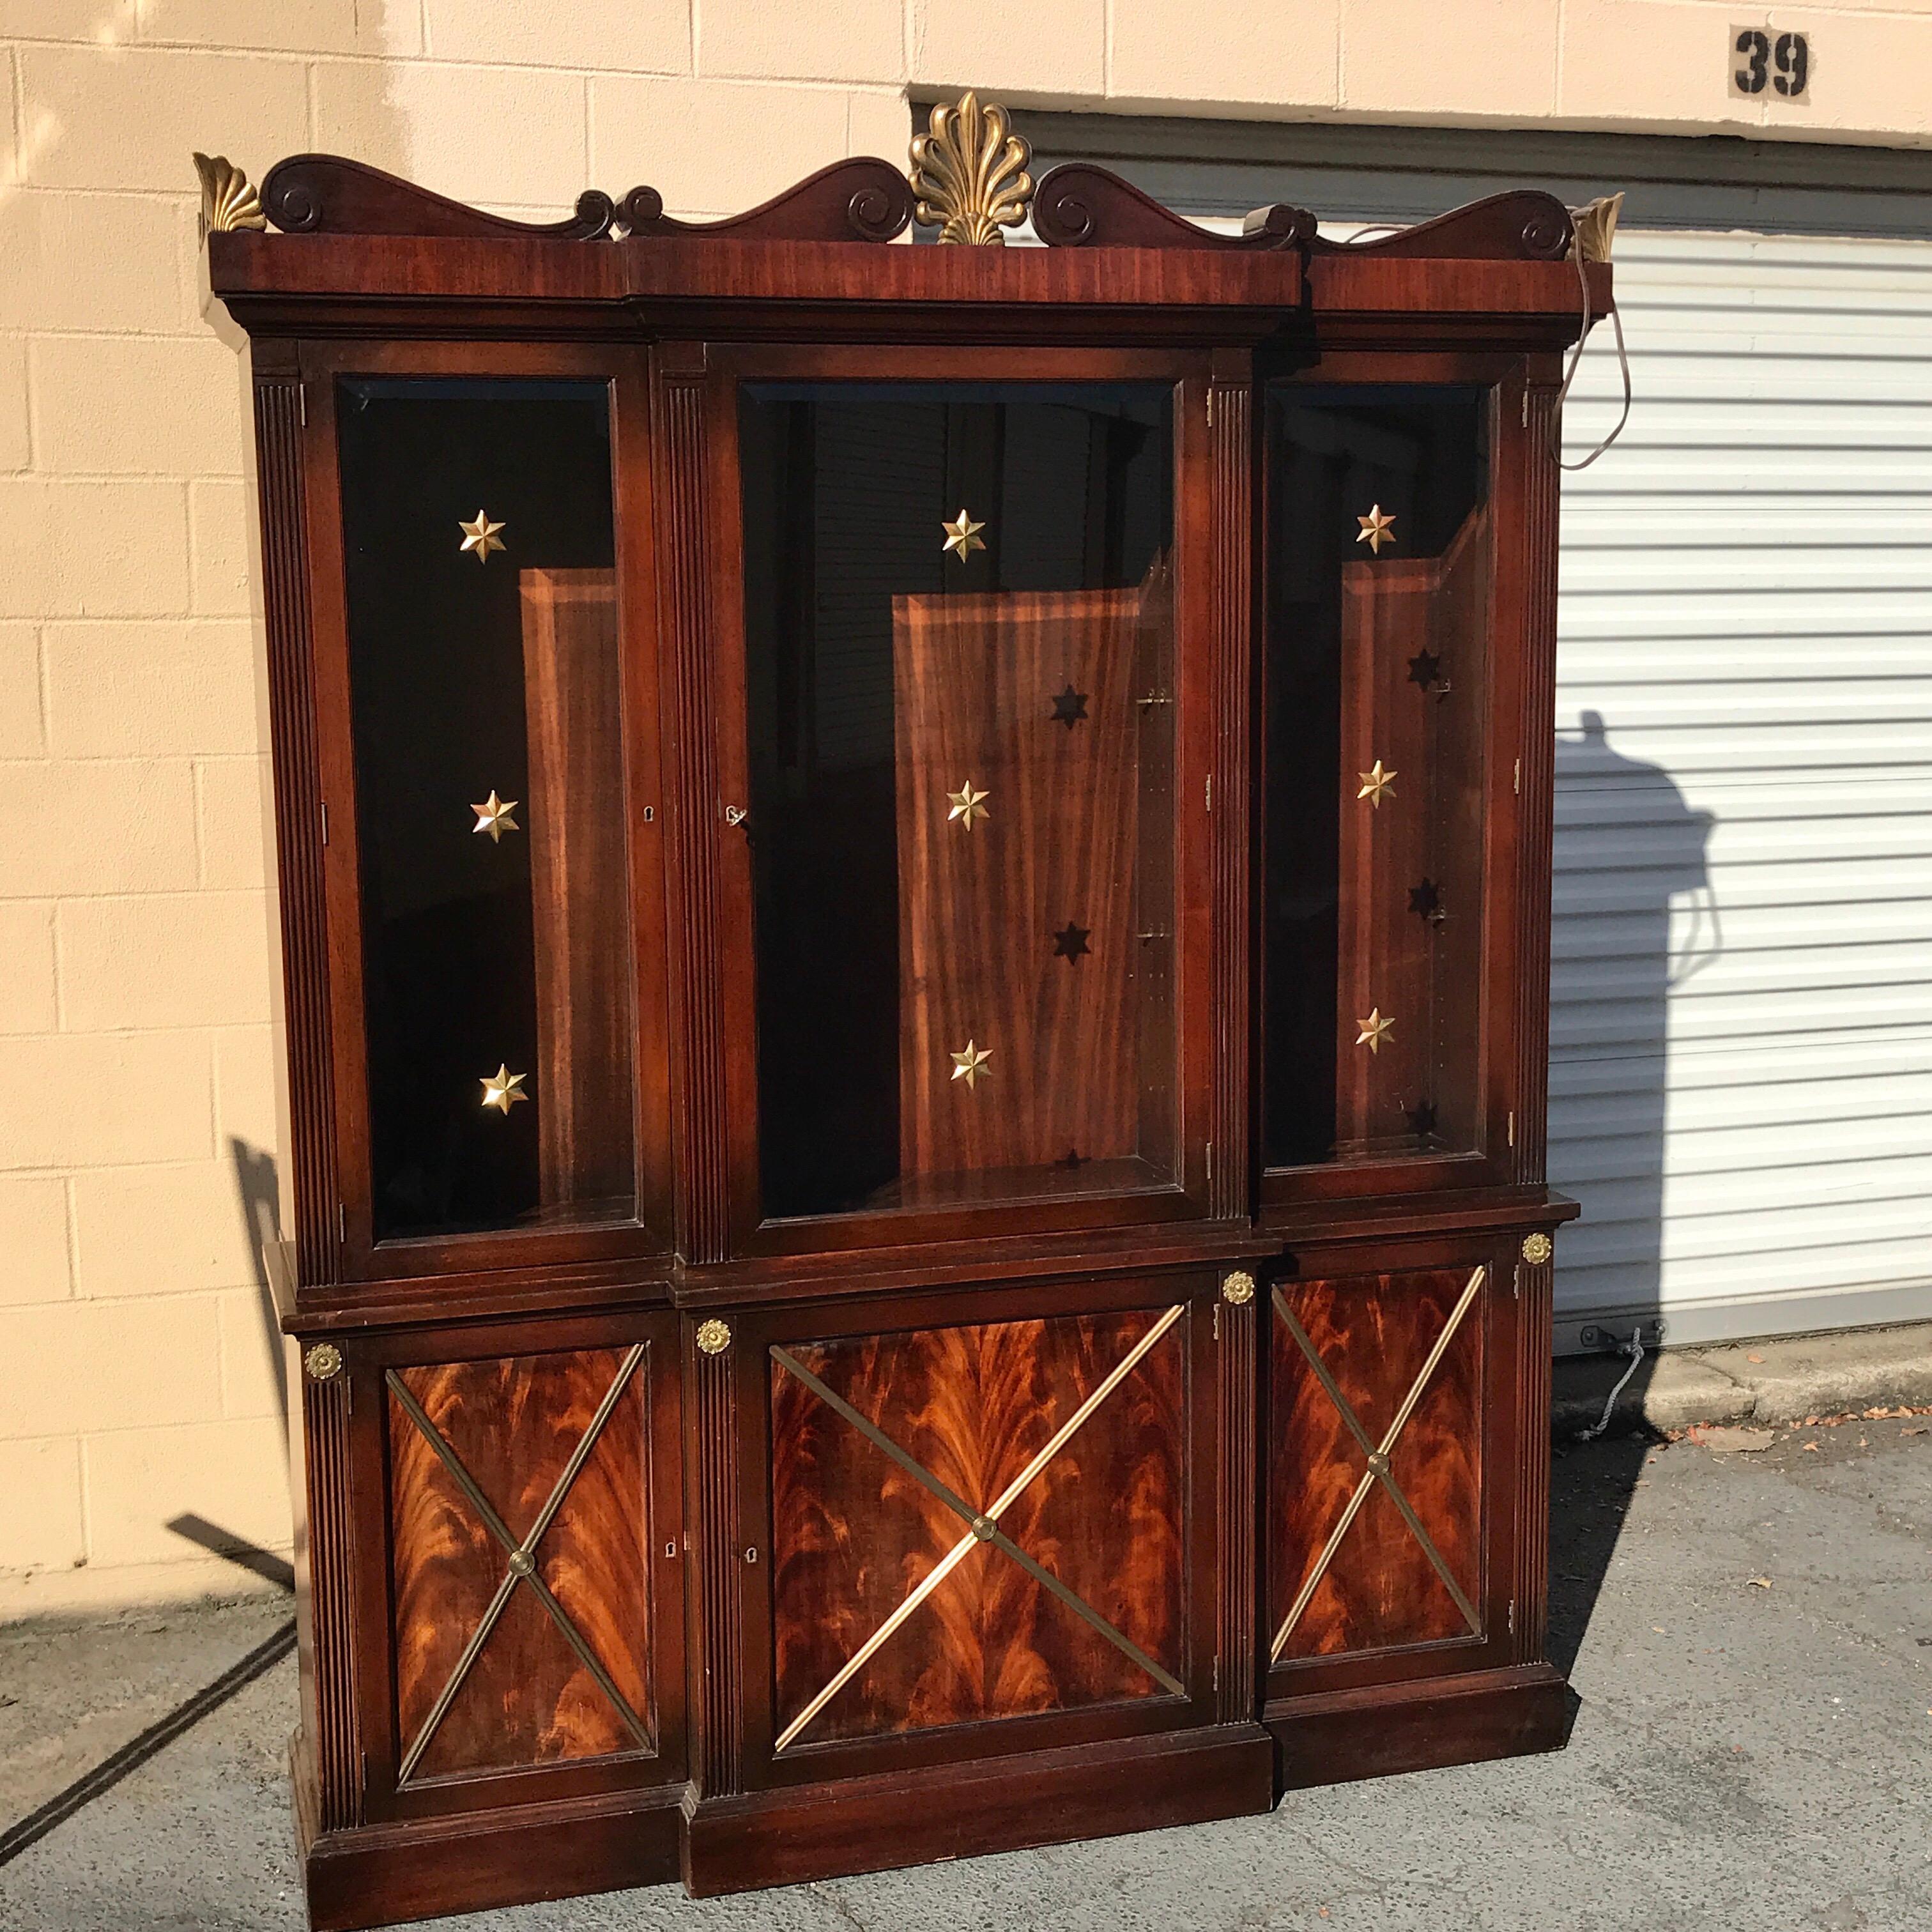 Hollywood Regency mahogany breakfront or bookcase, with nine applied gilt brass stars on the three glass doors, the flanking cabinets measure 15